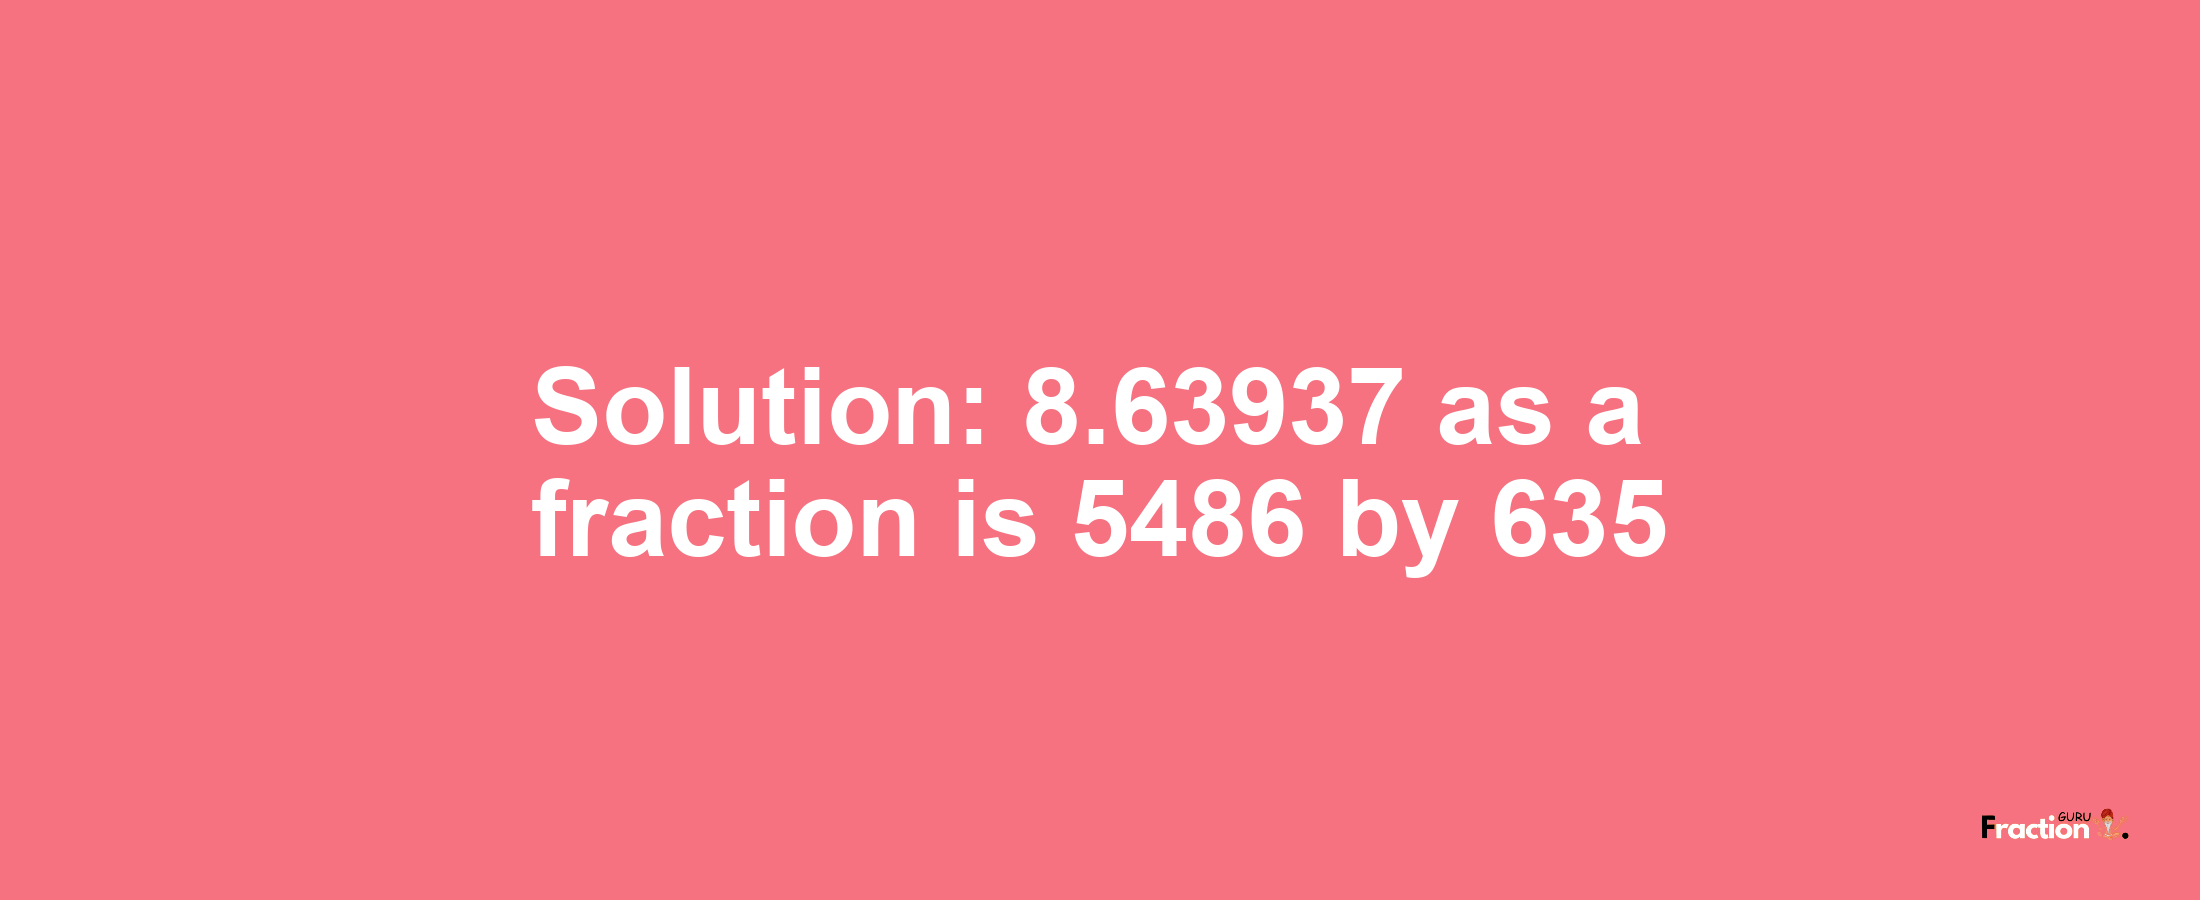 Solution:8.63937 as a fraction is 5486/635